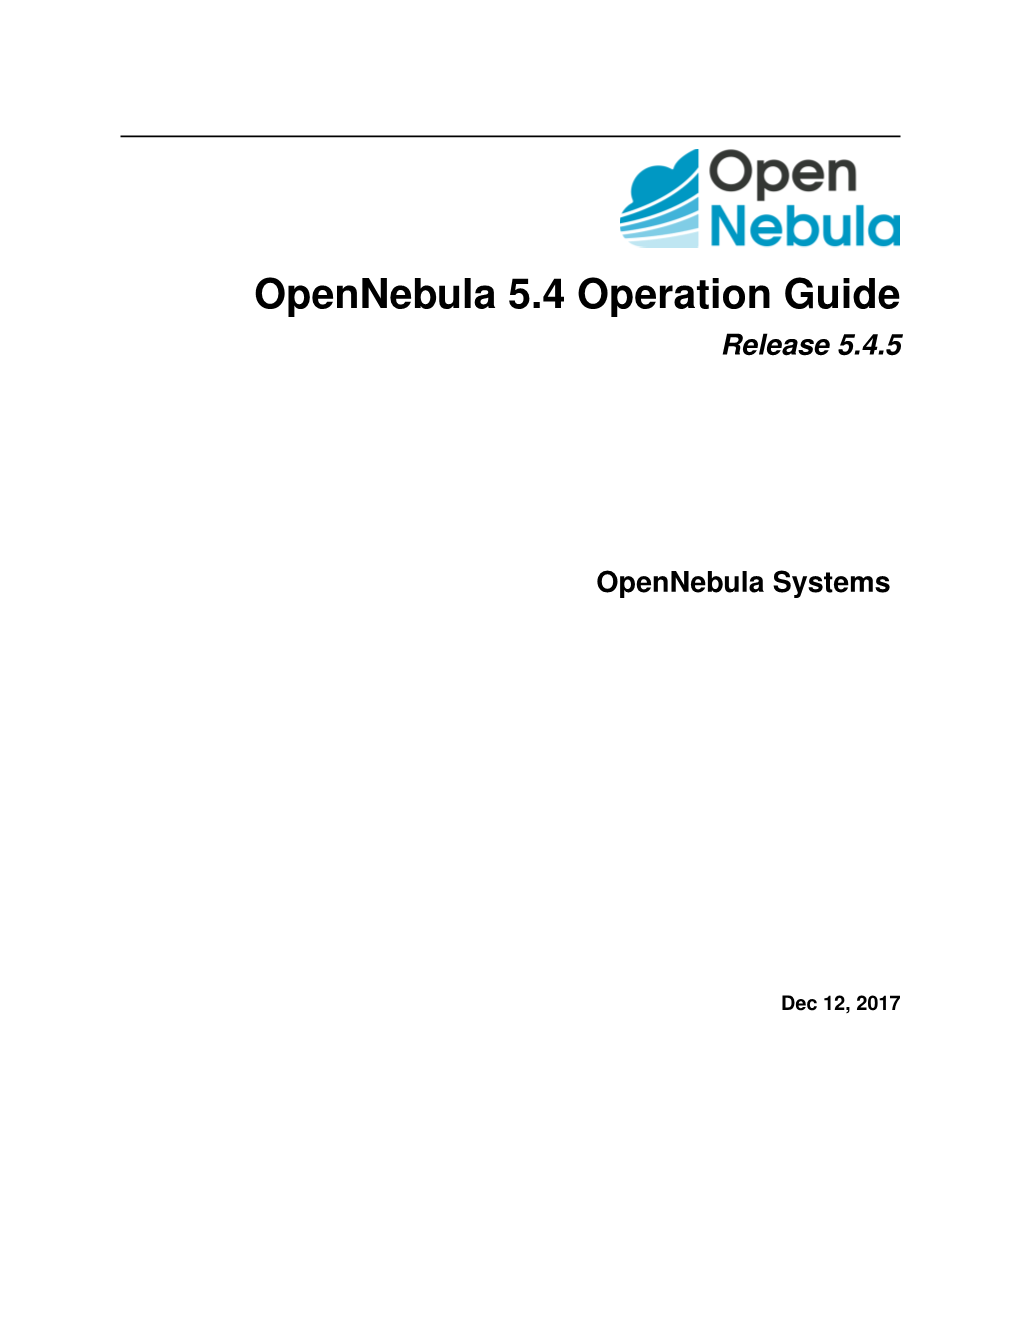 Opennebula 5.4 Operation Guide Release 5.4.5